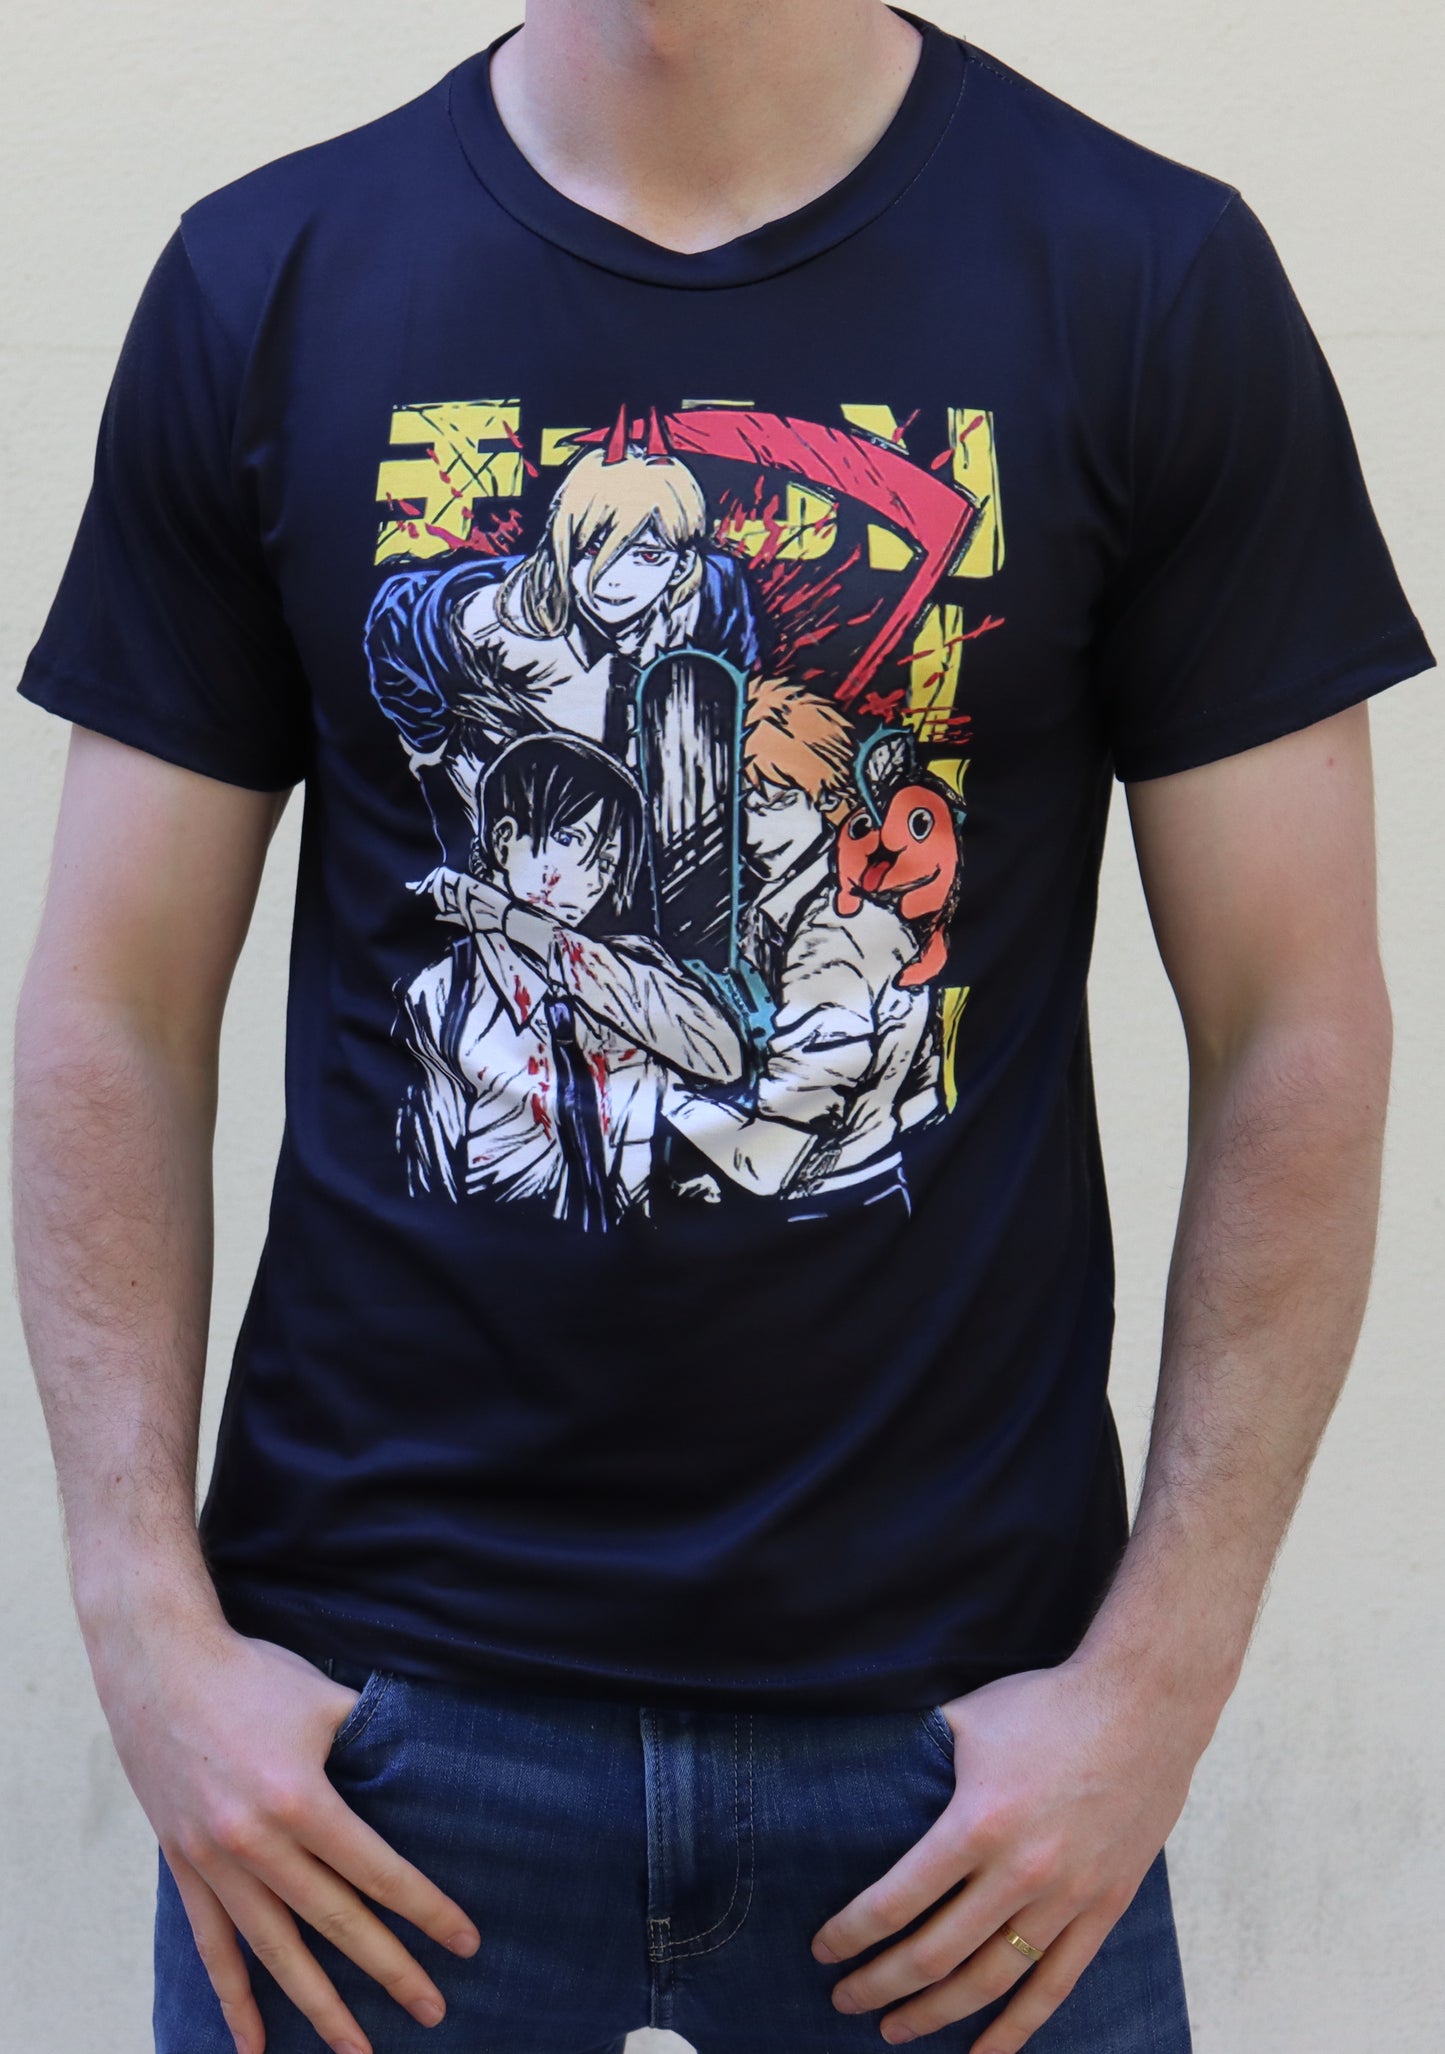 Chainsaw Man Cast T-Shirt(Price Does Not Include Shipping)